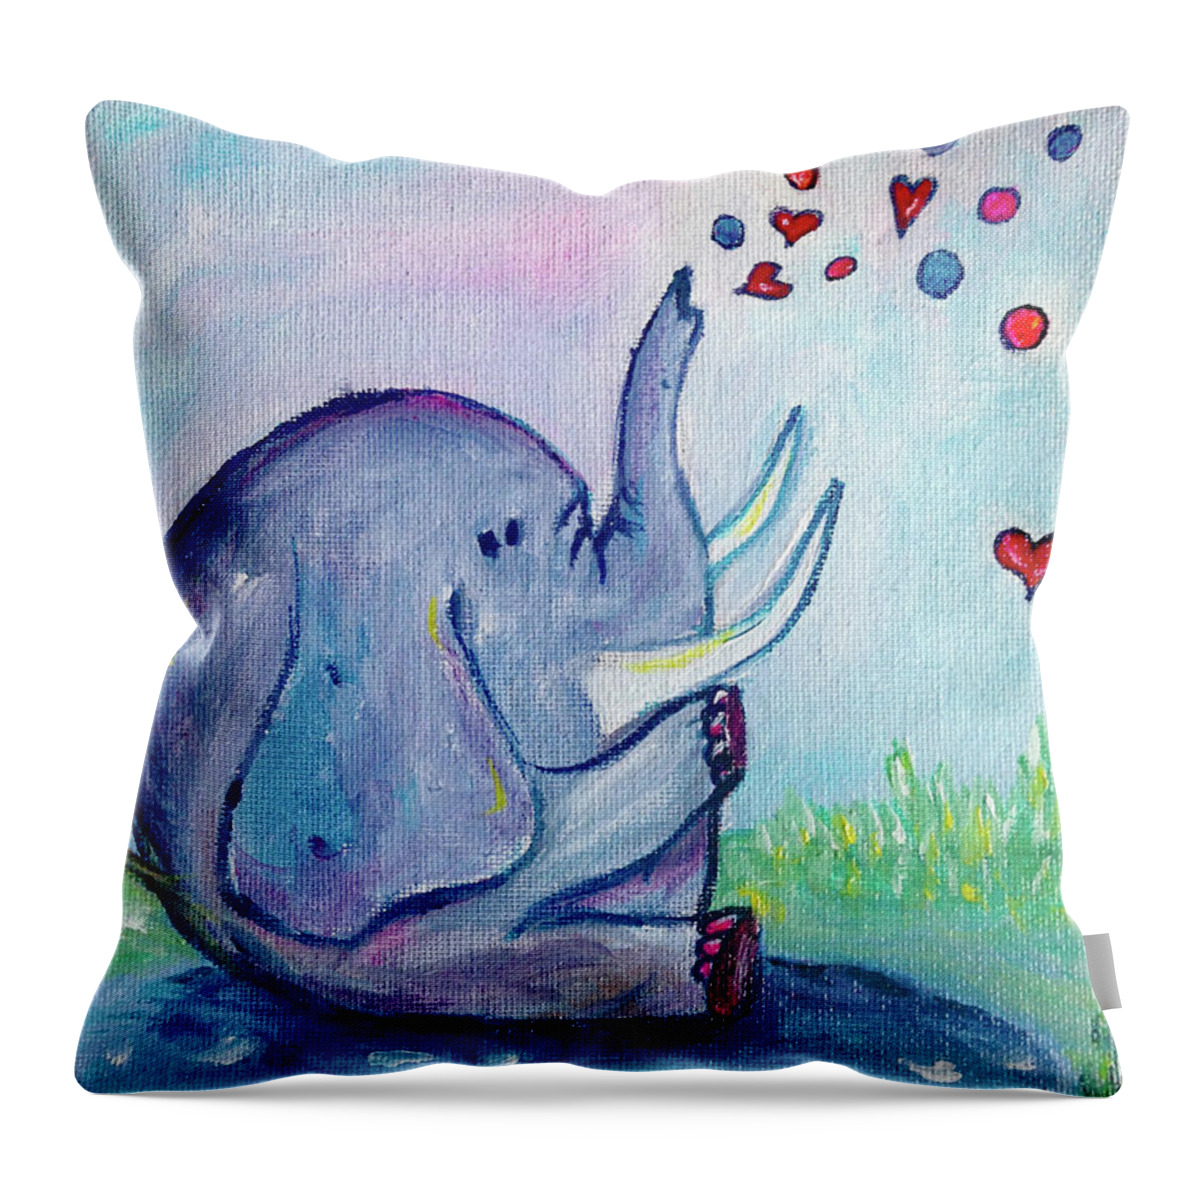 Elephant Throw Pillow featuring the painting Elephant Love by Roxy Rich